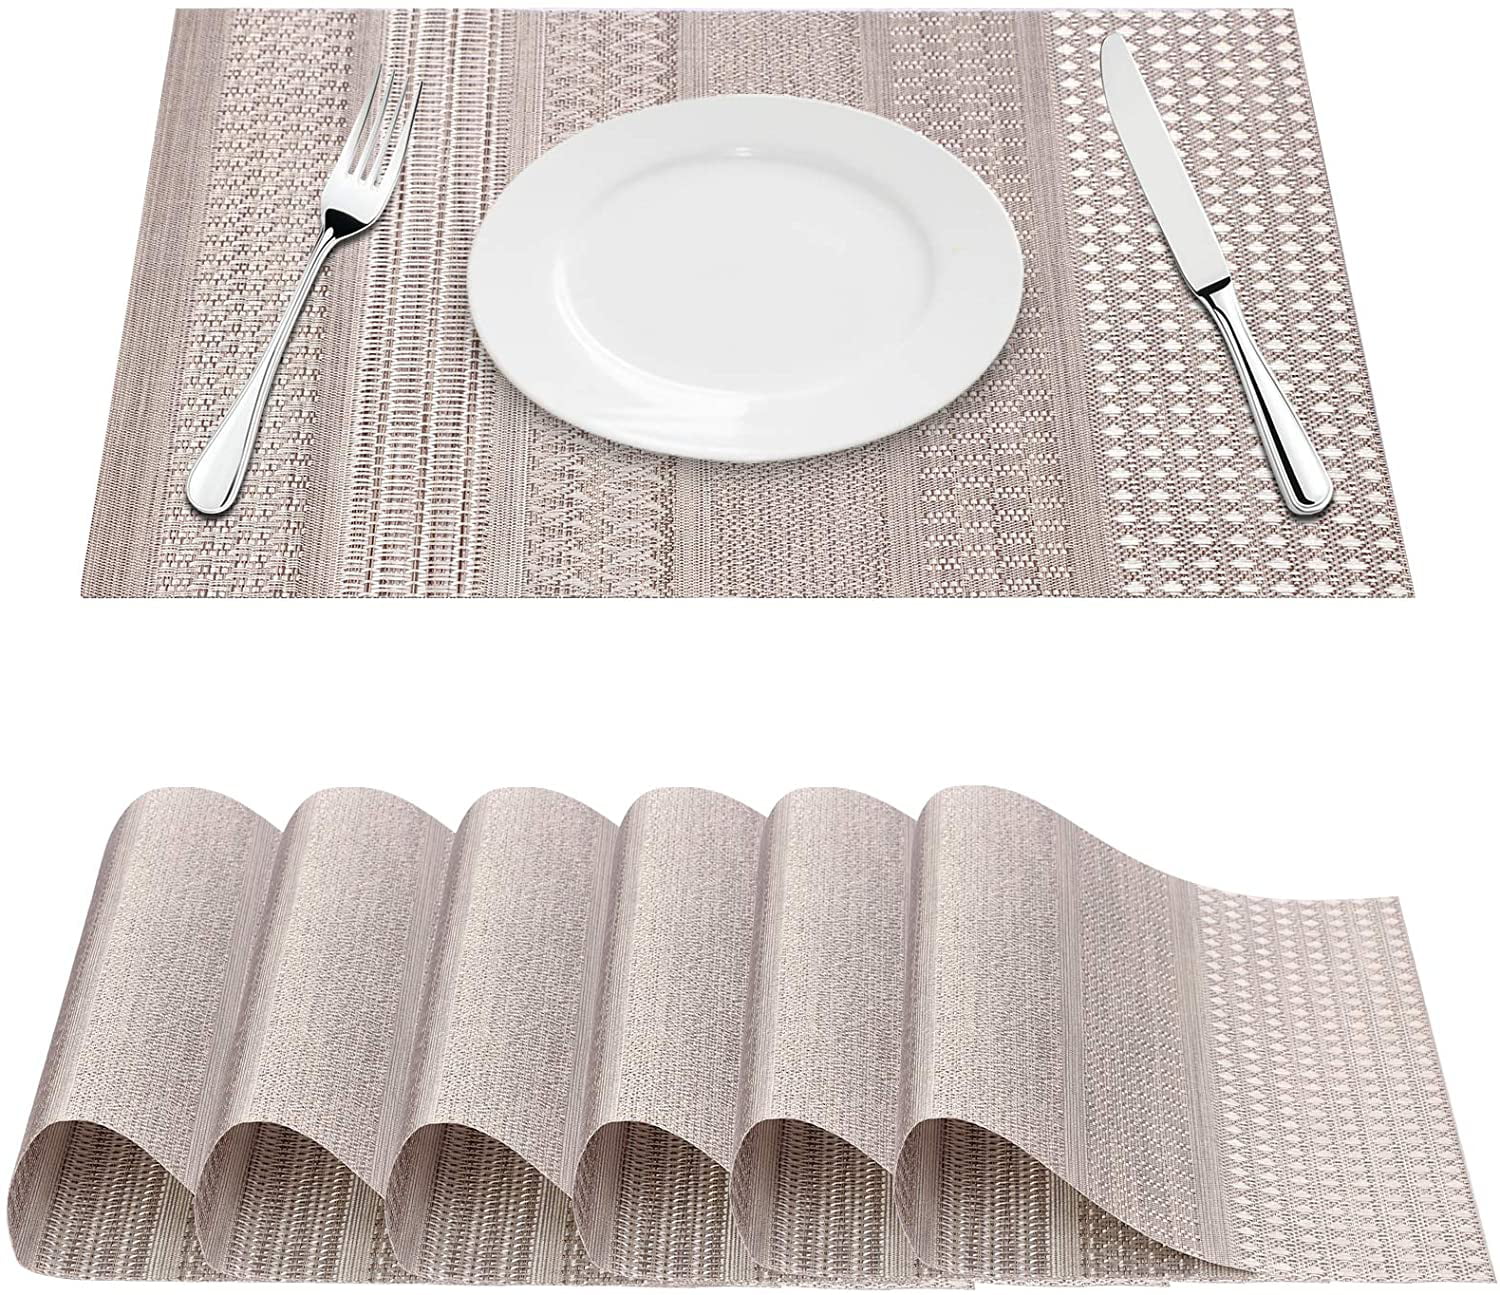 Placemats Heat-Resistant Washable Woven Anti-Skid PVC Table Mats Set of 6 Gray 